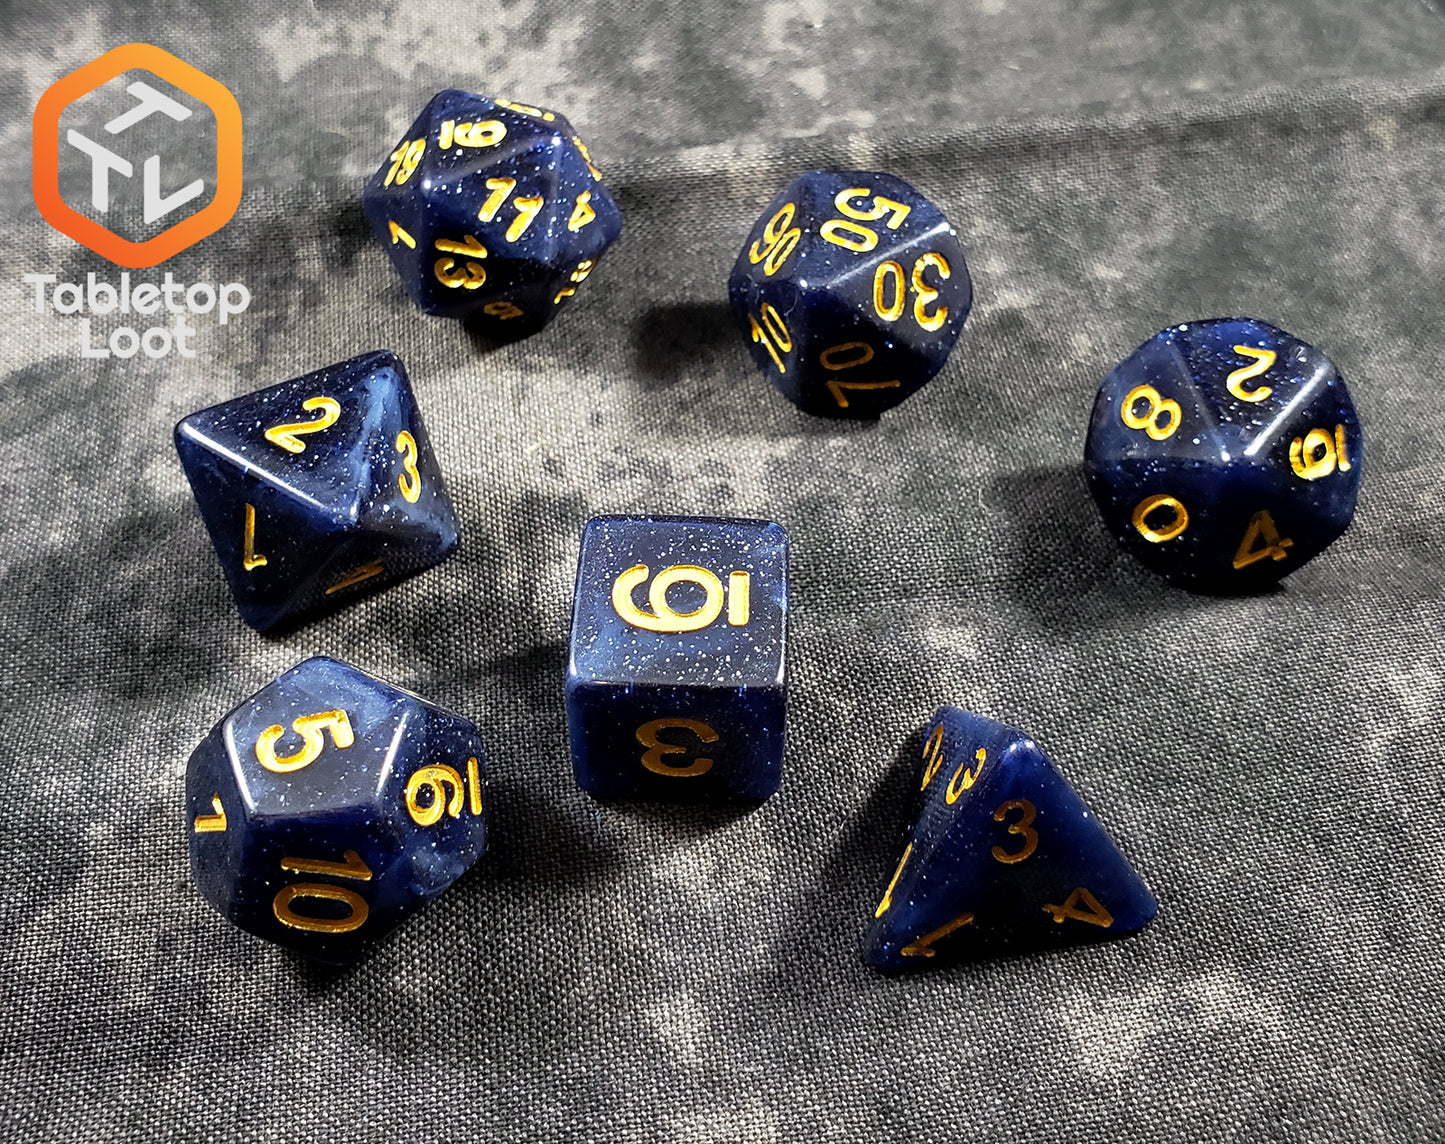 The Starry Twilight 7 piece dice set from Tabletop Loot, with an opaque deep navy resin filled with gold glitter and inked in gold.